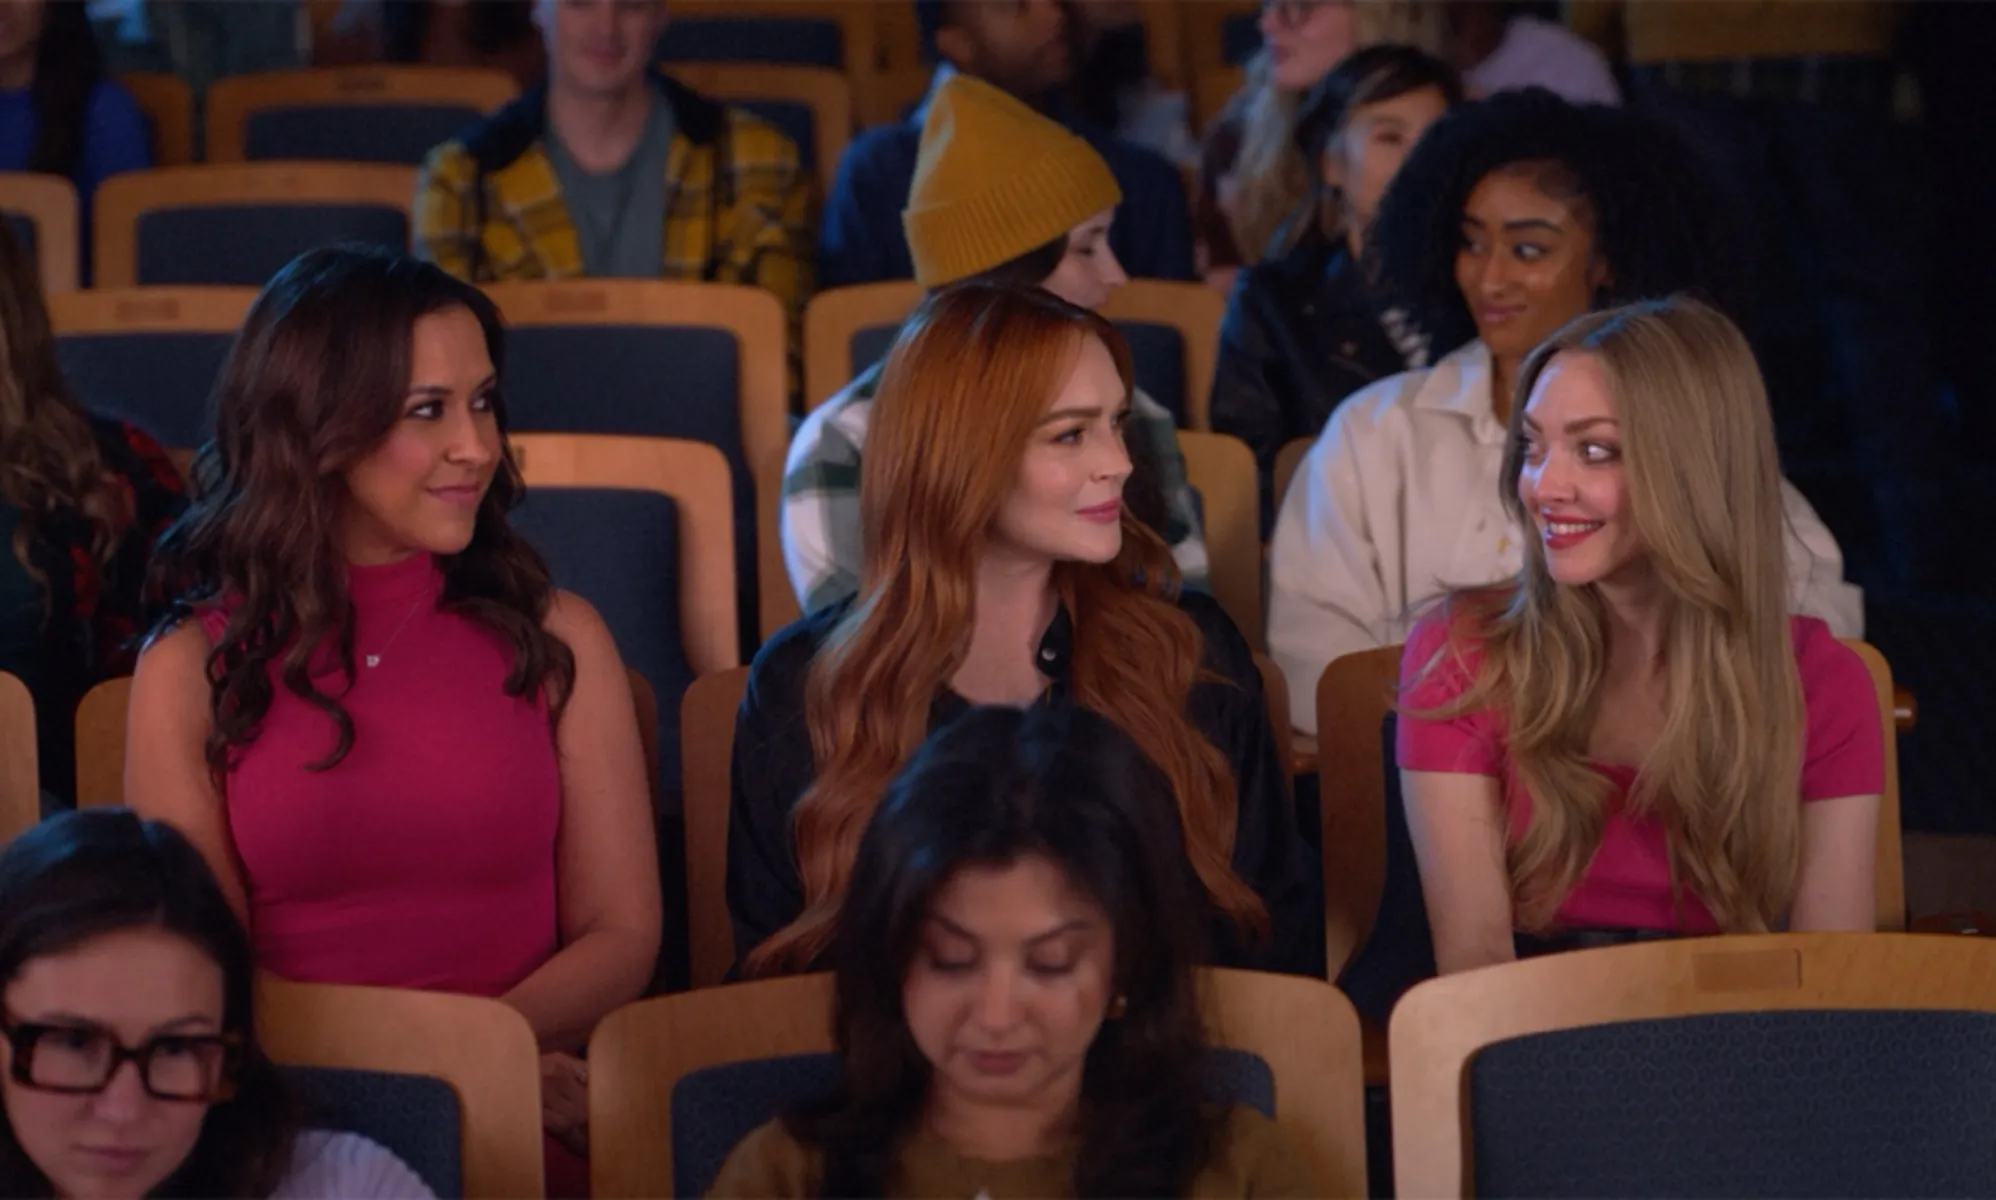 Mean Girls fans call for sequel with original cast after Walmart ad